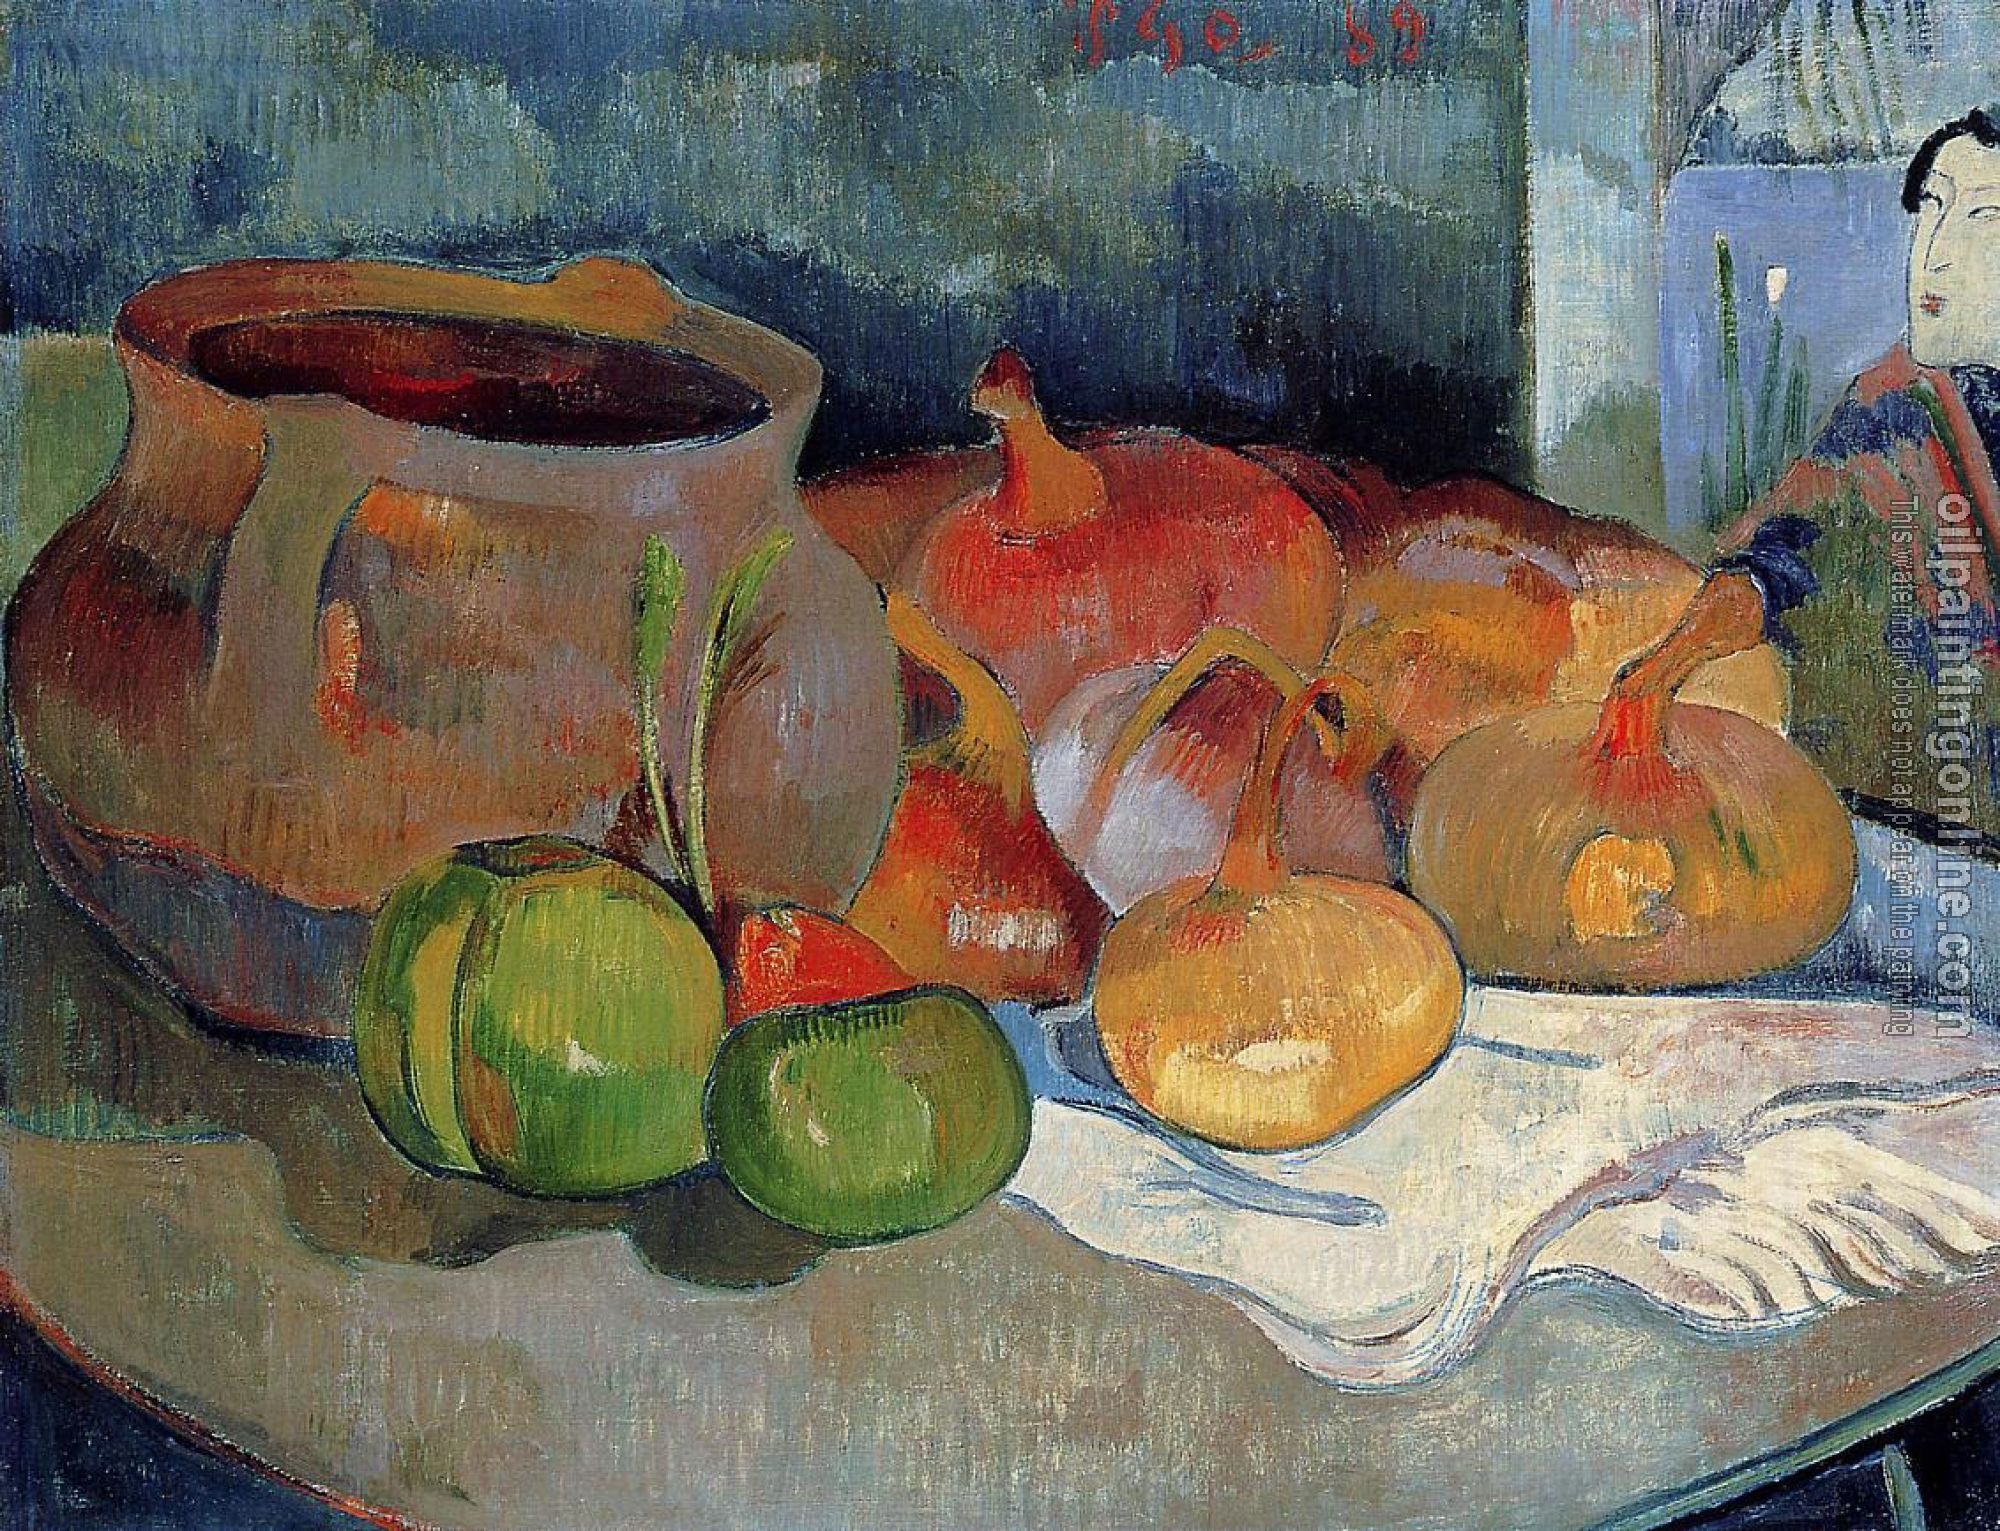 Gauguin, Paul - Still Life with Onions, Beetroot and a Japanese Print